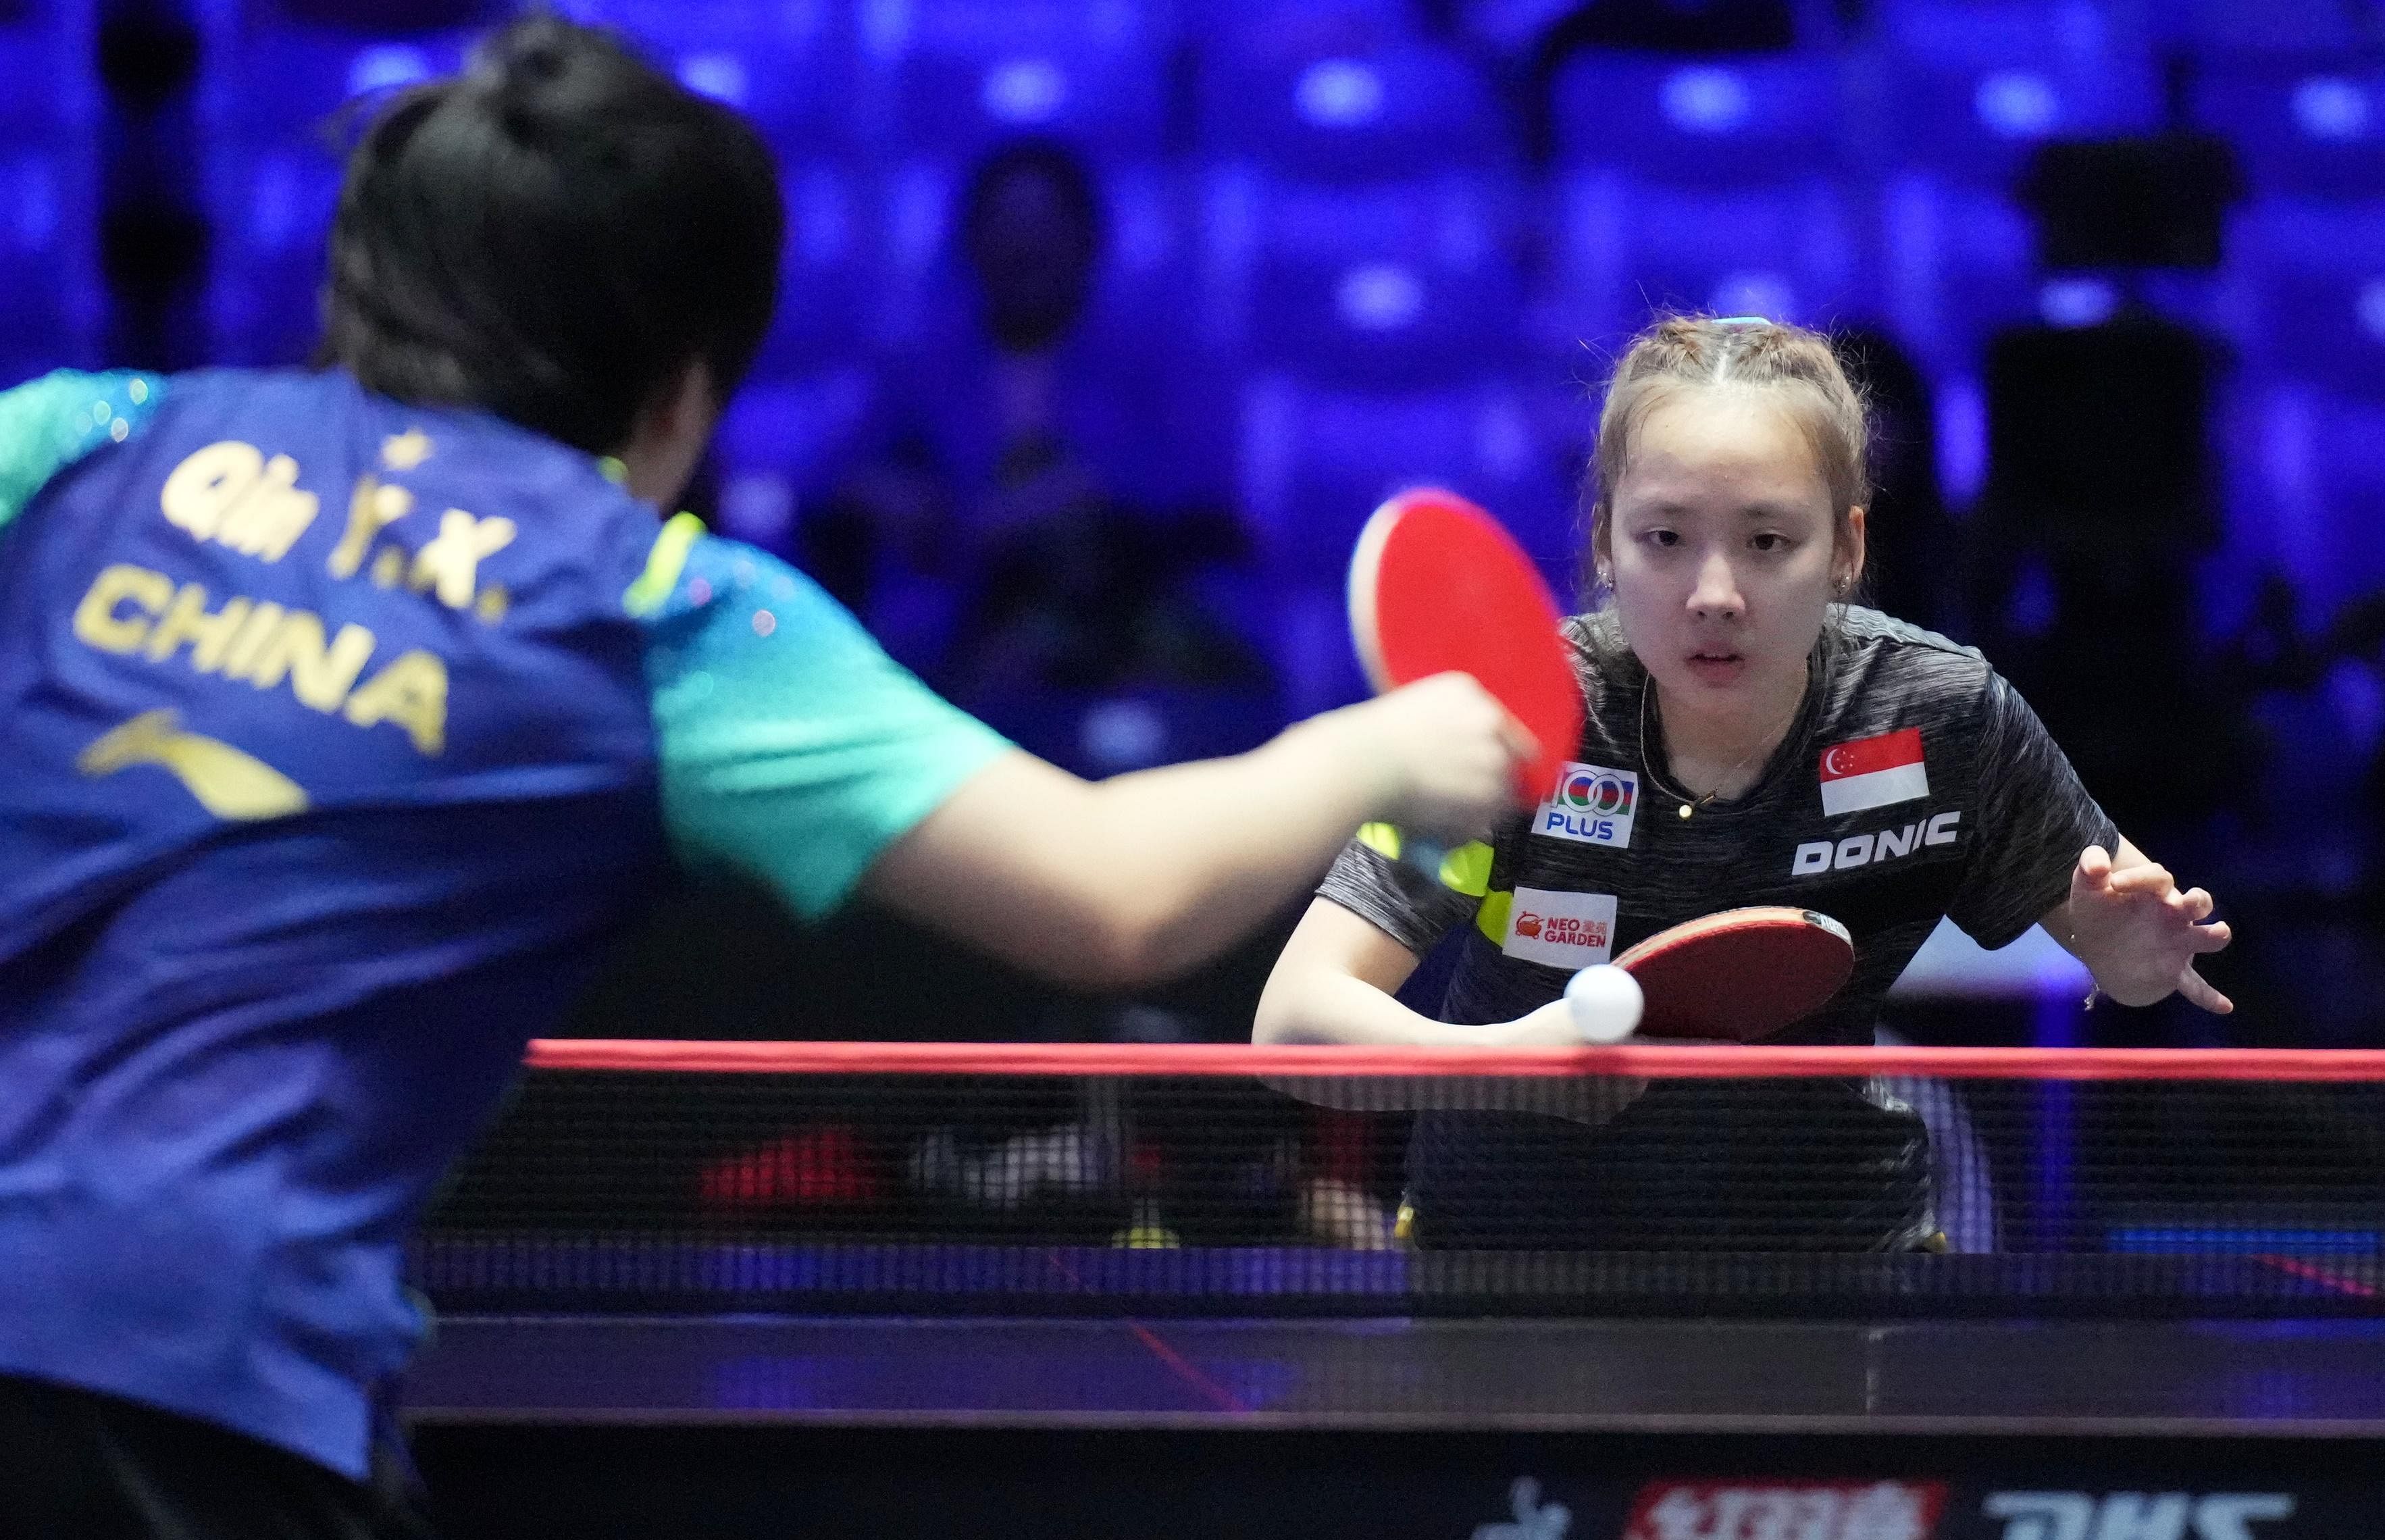 Singapore’s Ser Lin Qian finishes second in WTT Youth Star Contender